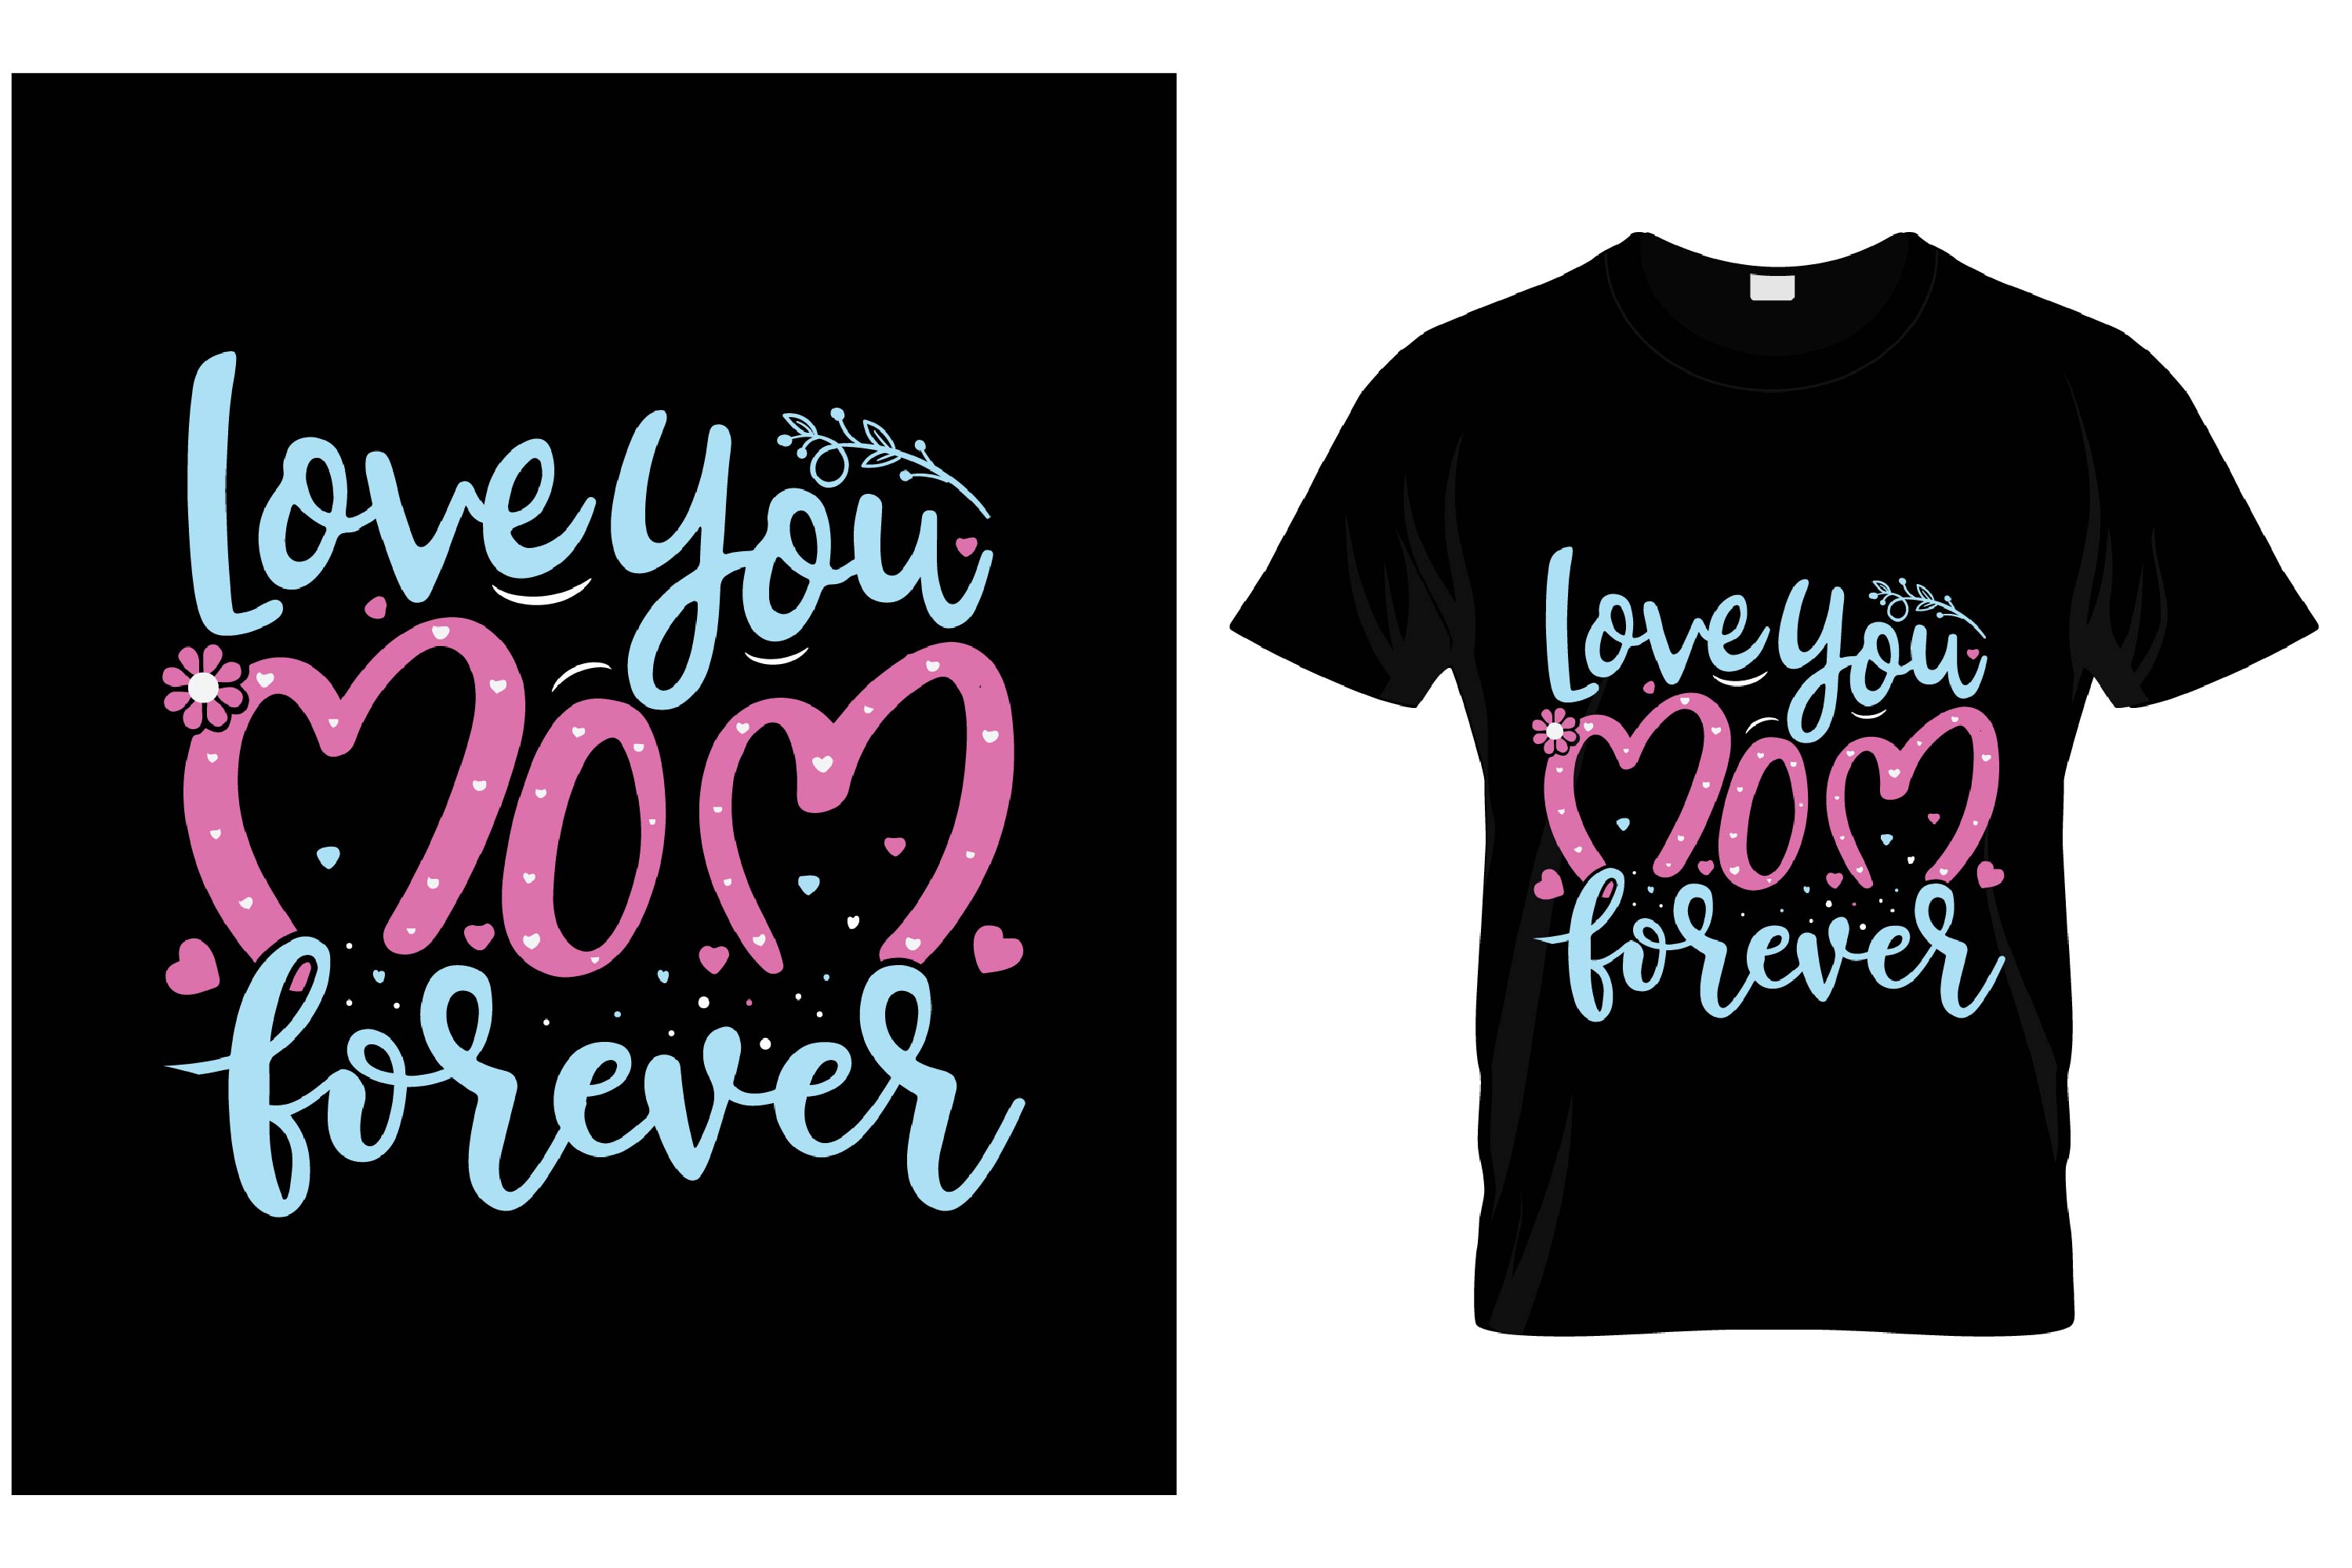 Image of a black t-shirt with an exquisite print in pink and blue about mom.